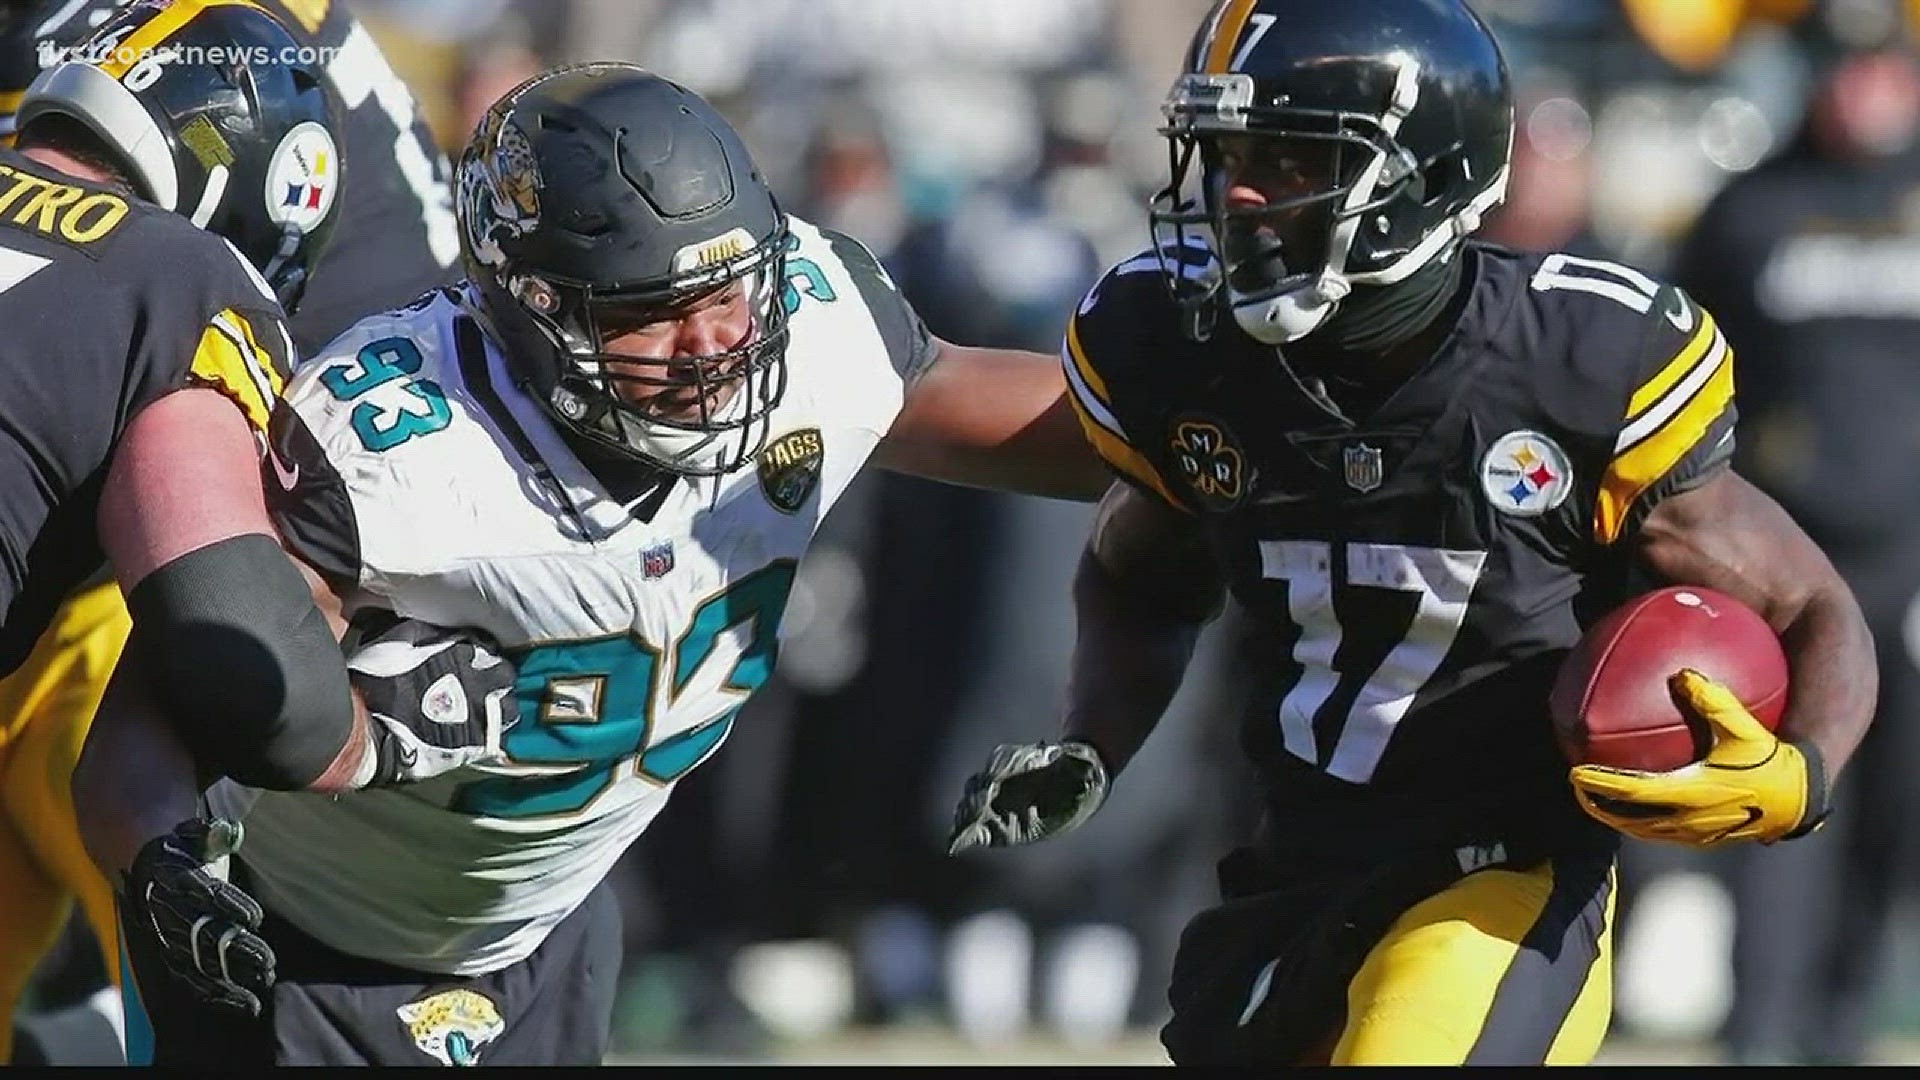 New England is favored to win, but the Jaguars are determined to try and beat them on Sunday.